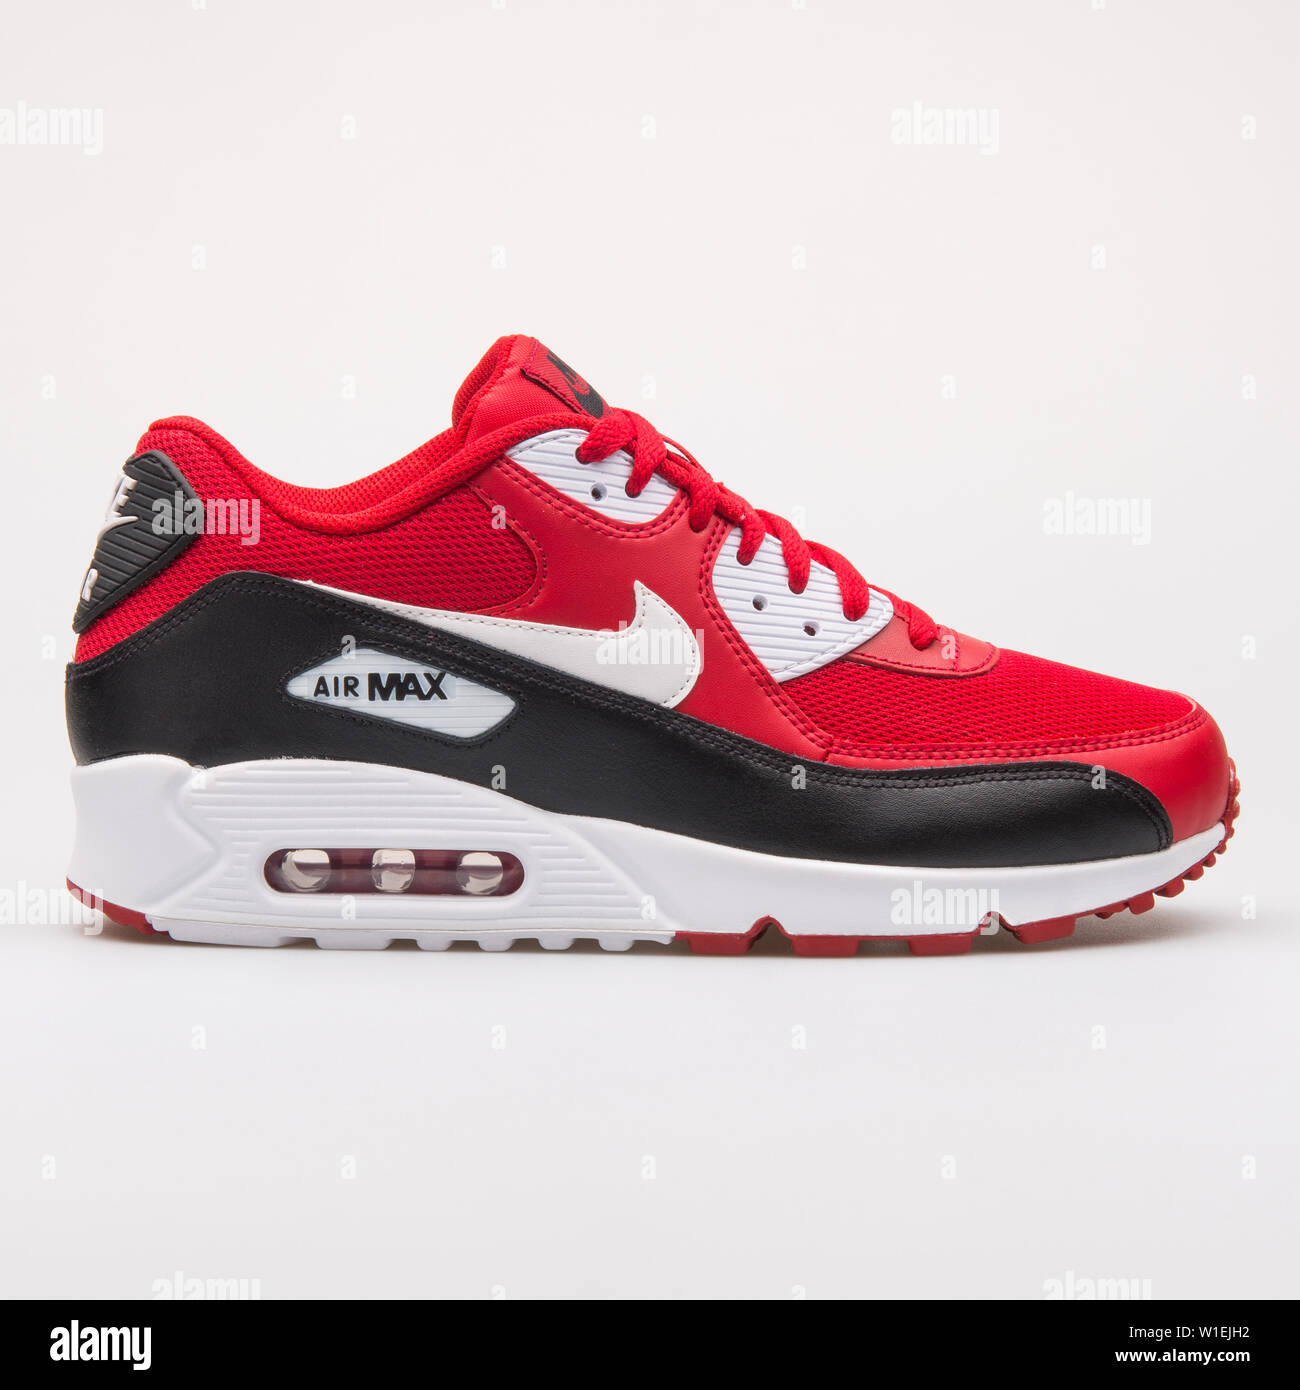 VIENNA, AUSTRIA - AUGUST 23, 2017: Nike Air Max 90 Essential red, black and  white sneaker on white background Stock Photo - Alamy